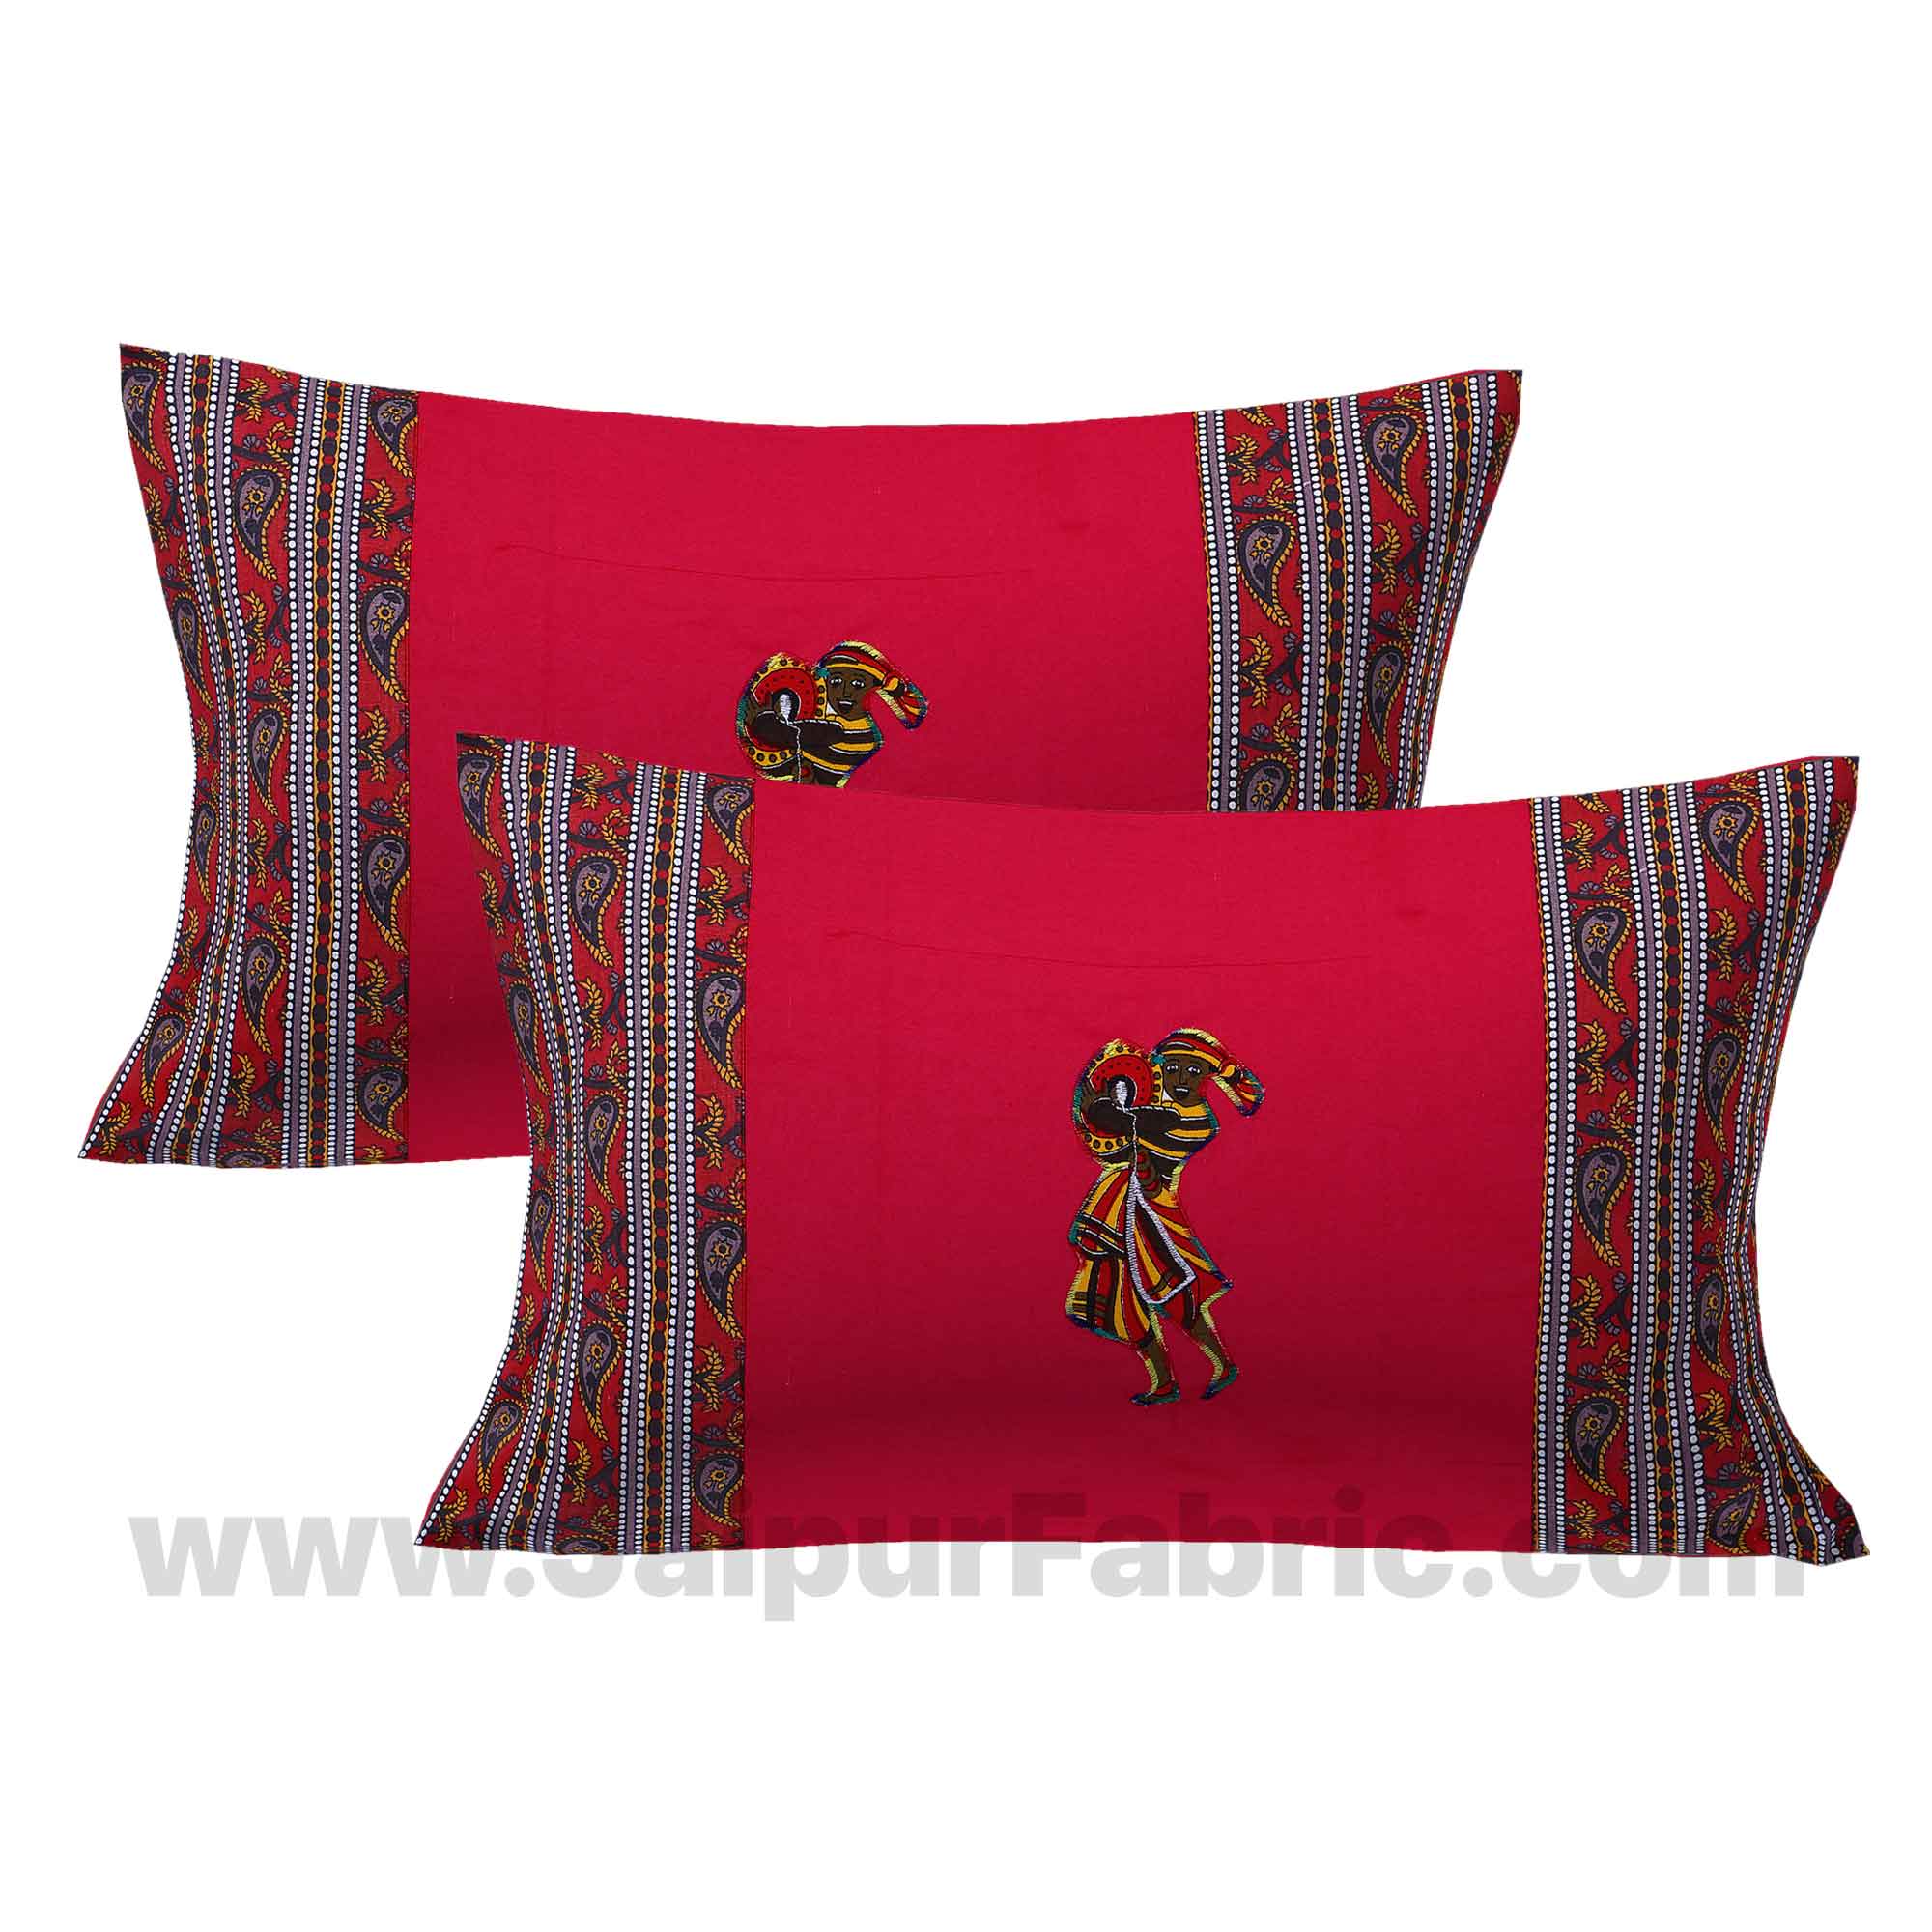 Applique Red Chang Dance Jaipuri  Hand Made Embroidery Patch Work Double Bedsheet